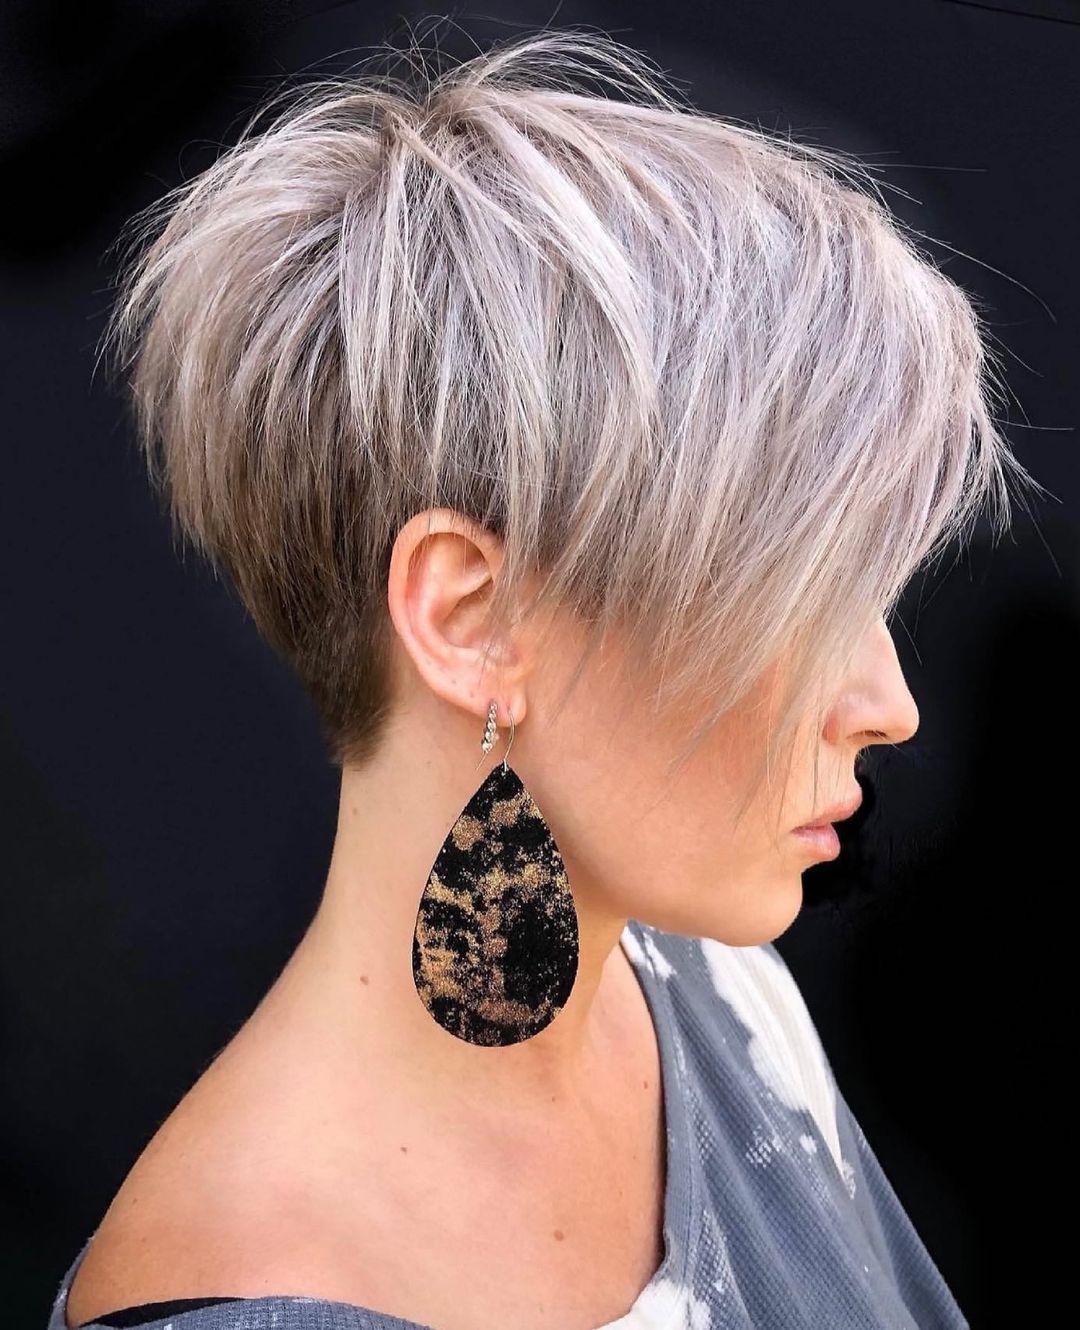 10 Best Ideas For Short Pixie Cuts Hairstyles